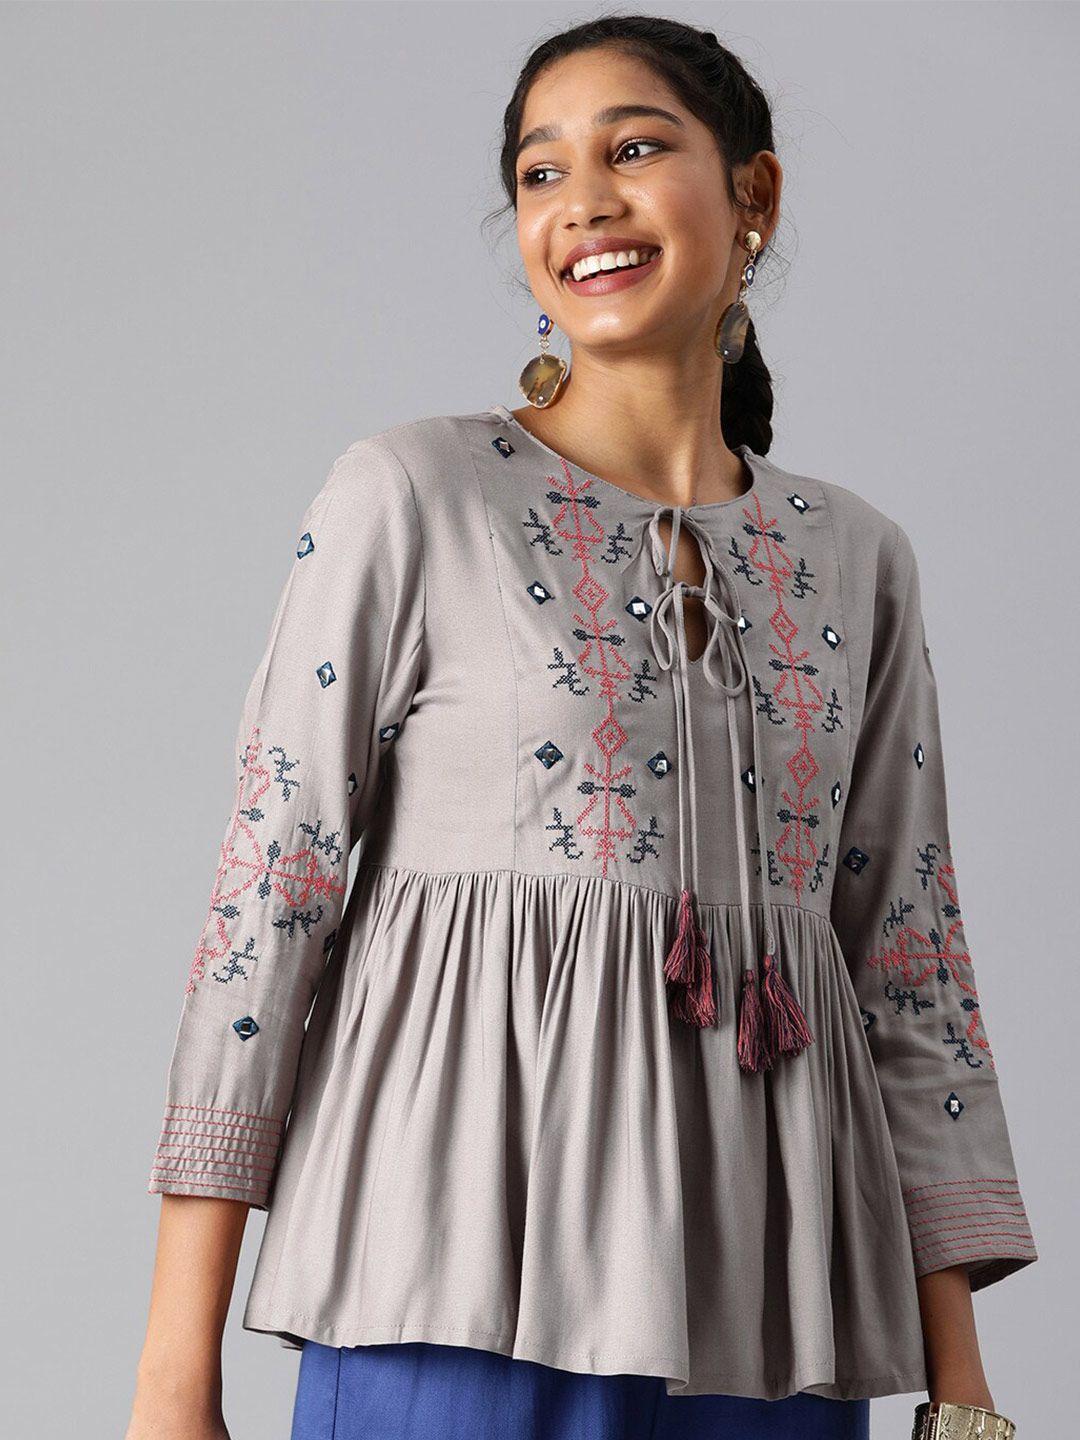 mast & harbour grey geometric embroidered & mirror embellished tie-up neck peplum top